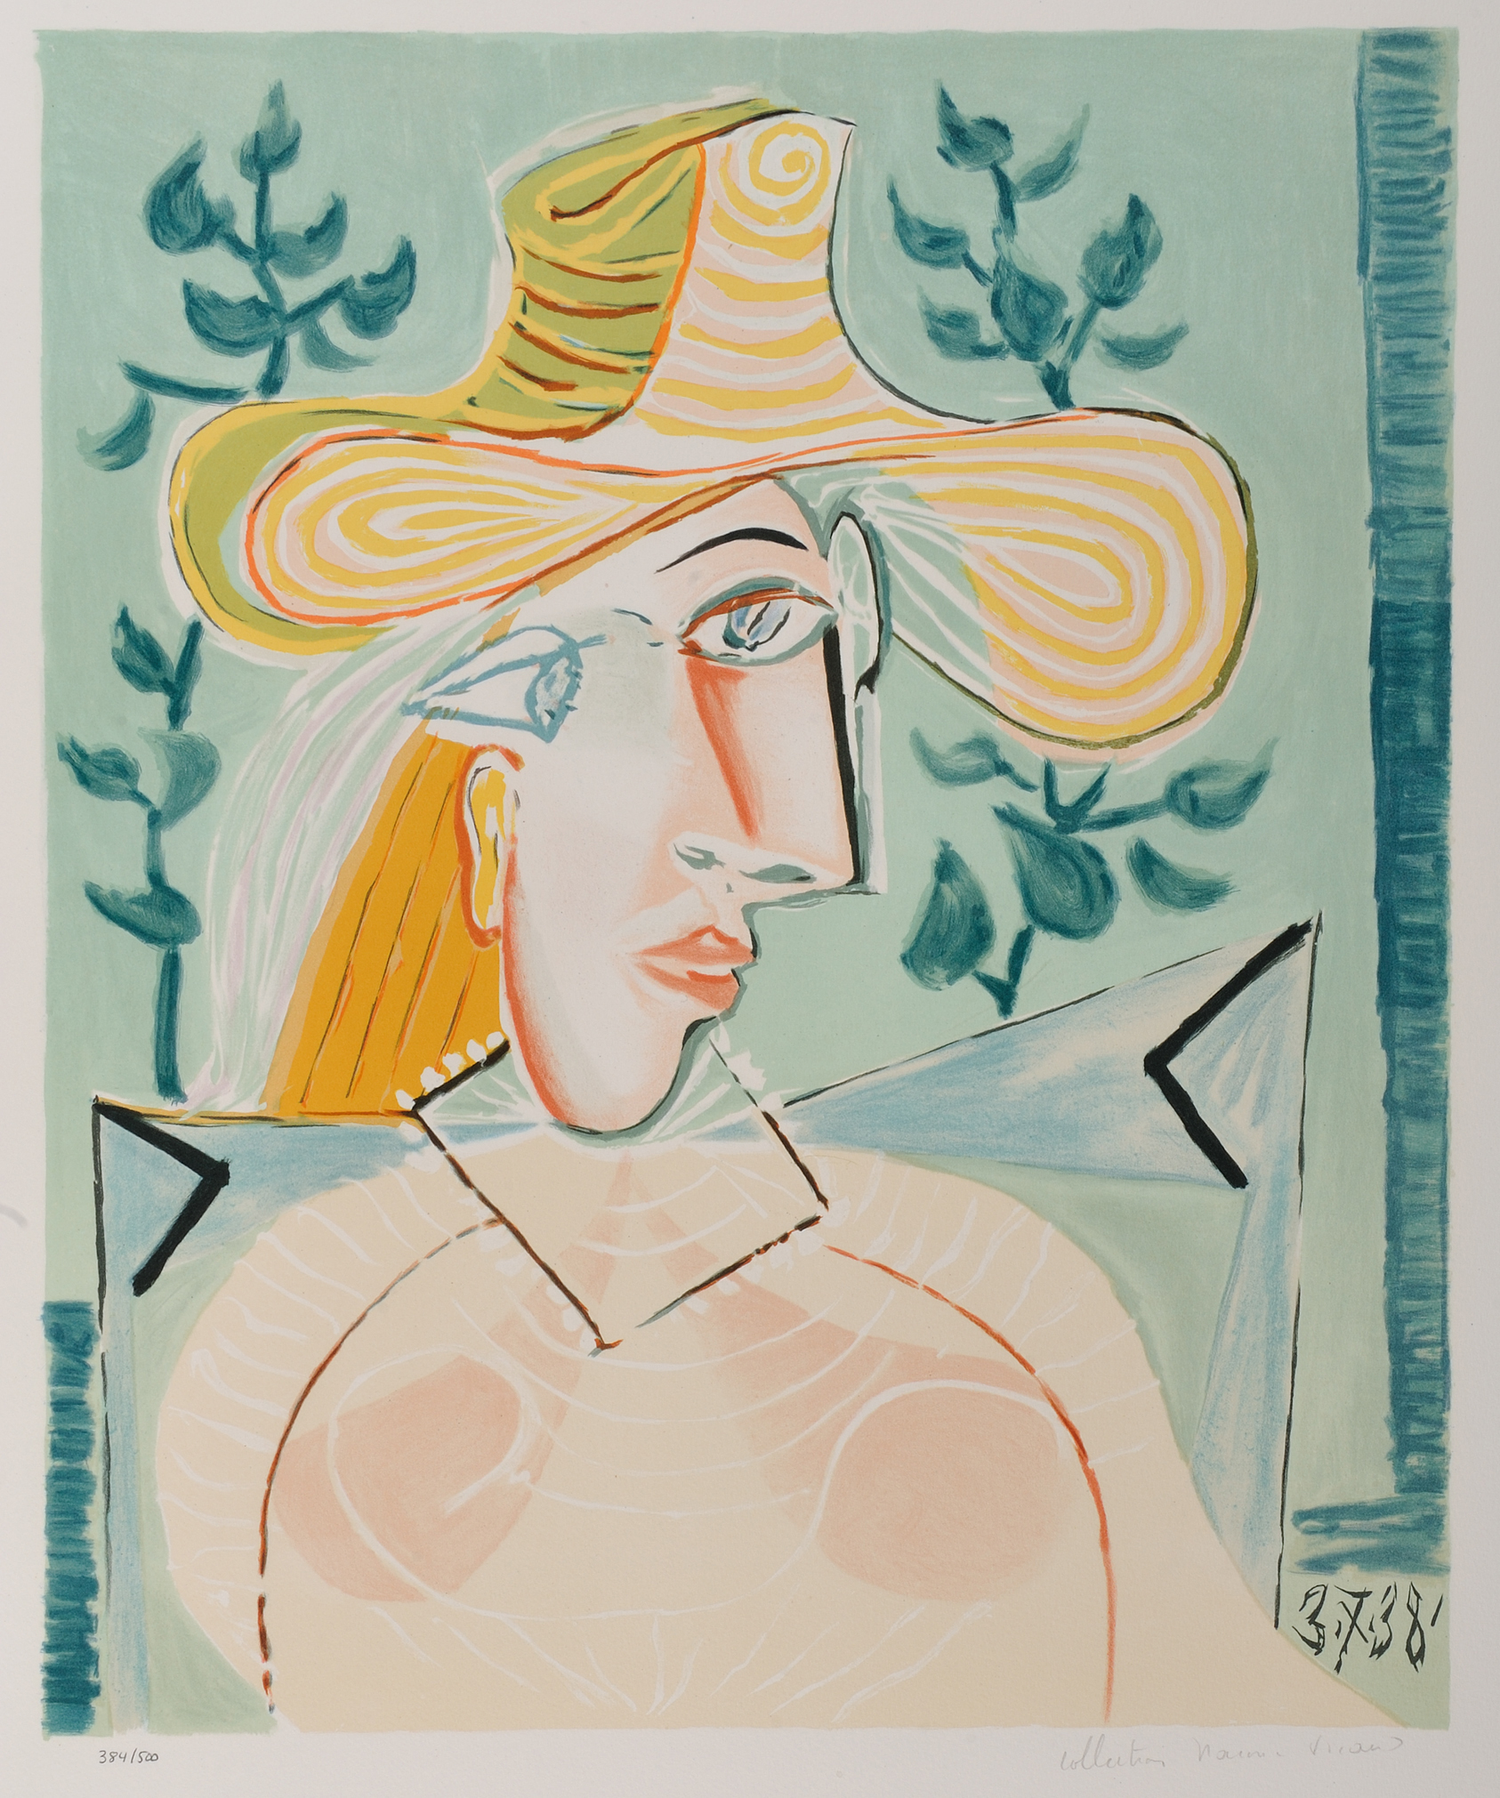 Pablo Picasso - Portraits from The Marina Picasso Collection